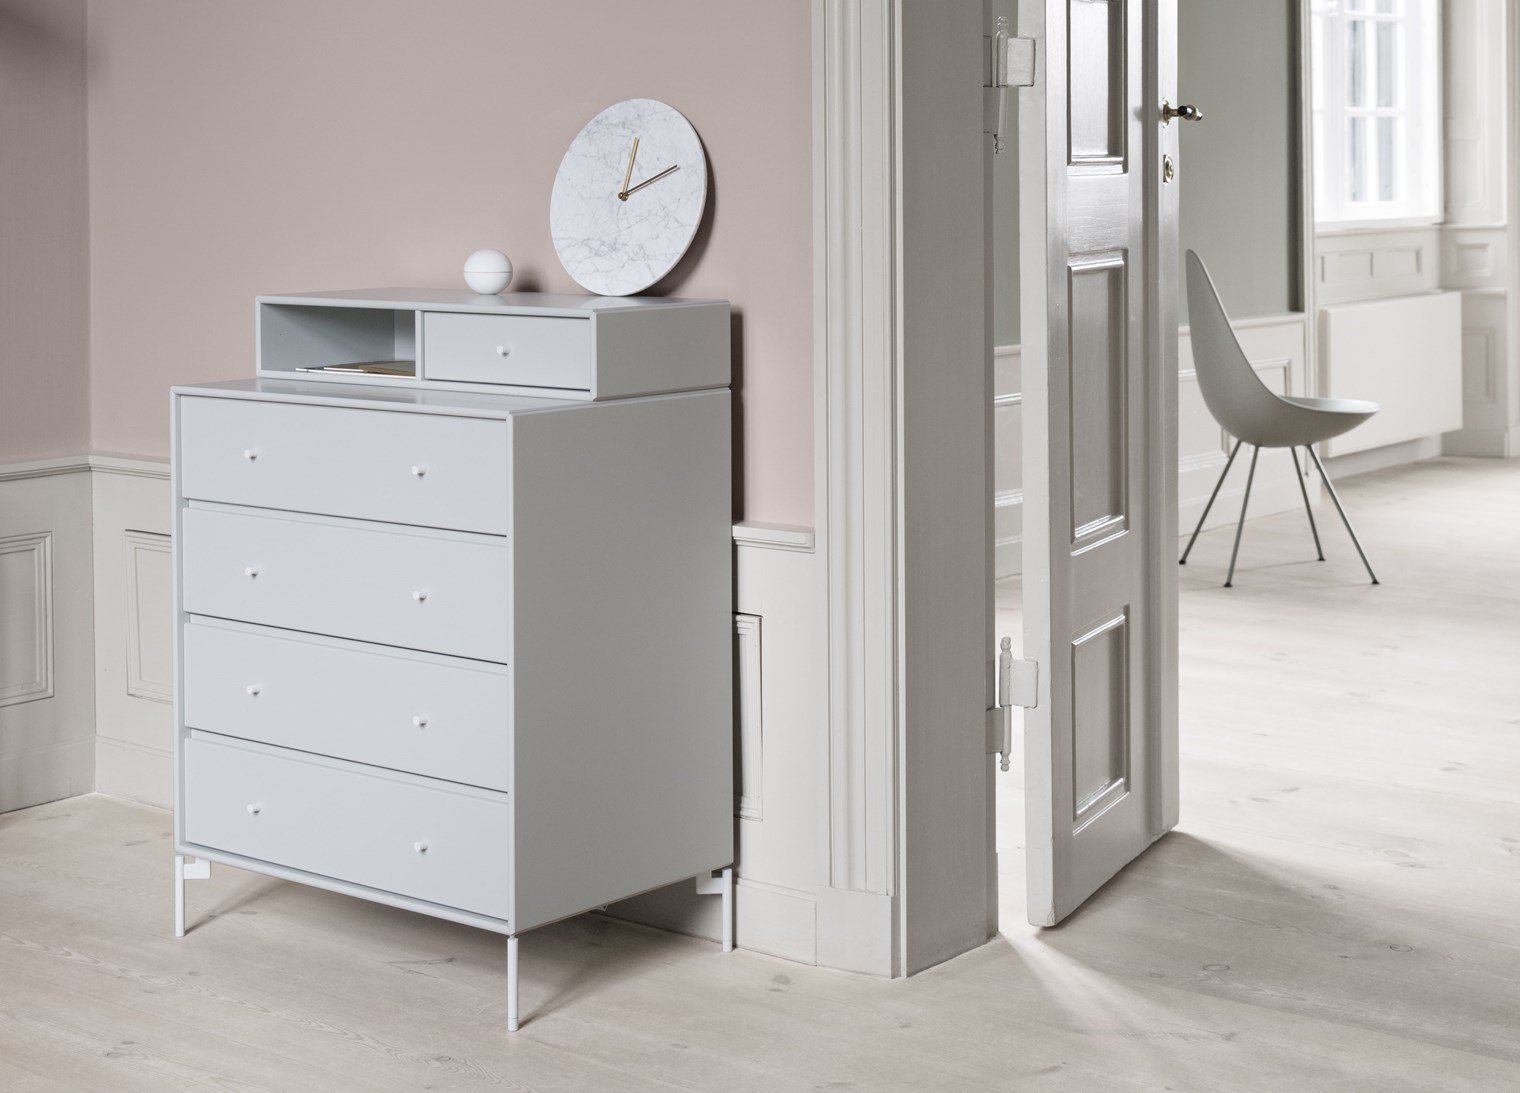 Montana Keep Chest Of Drawers With Legs, Oyster/Matt Chrome